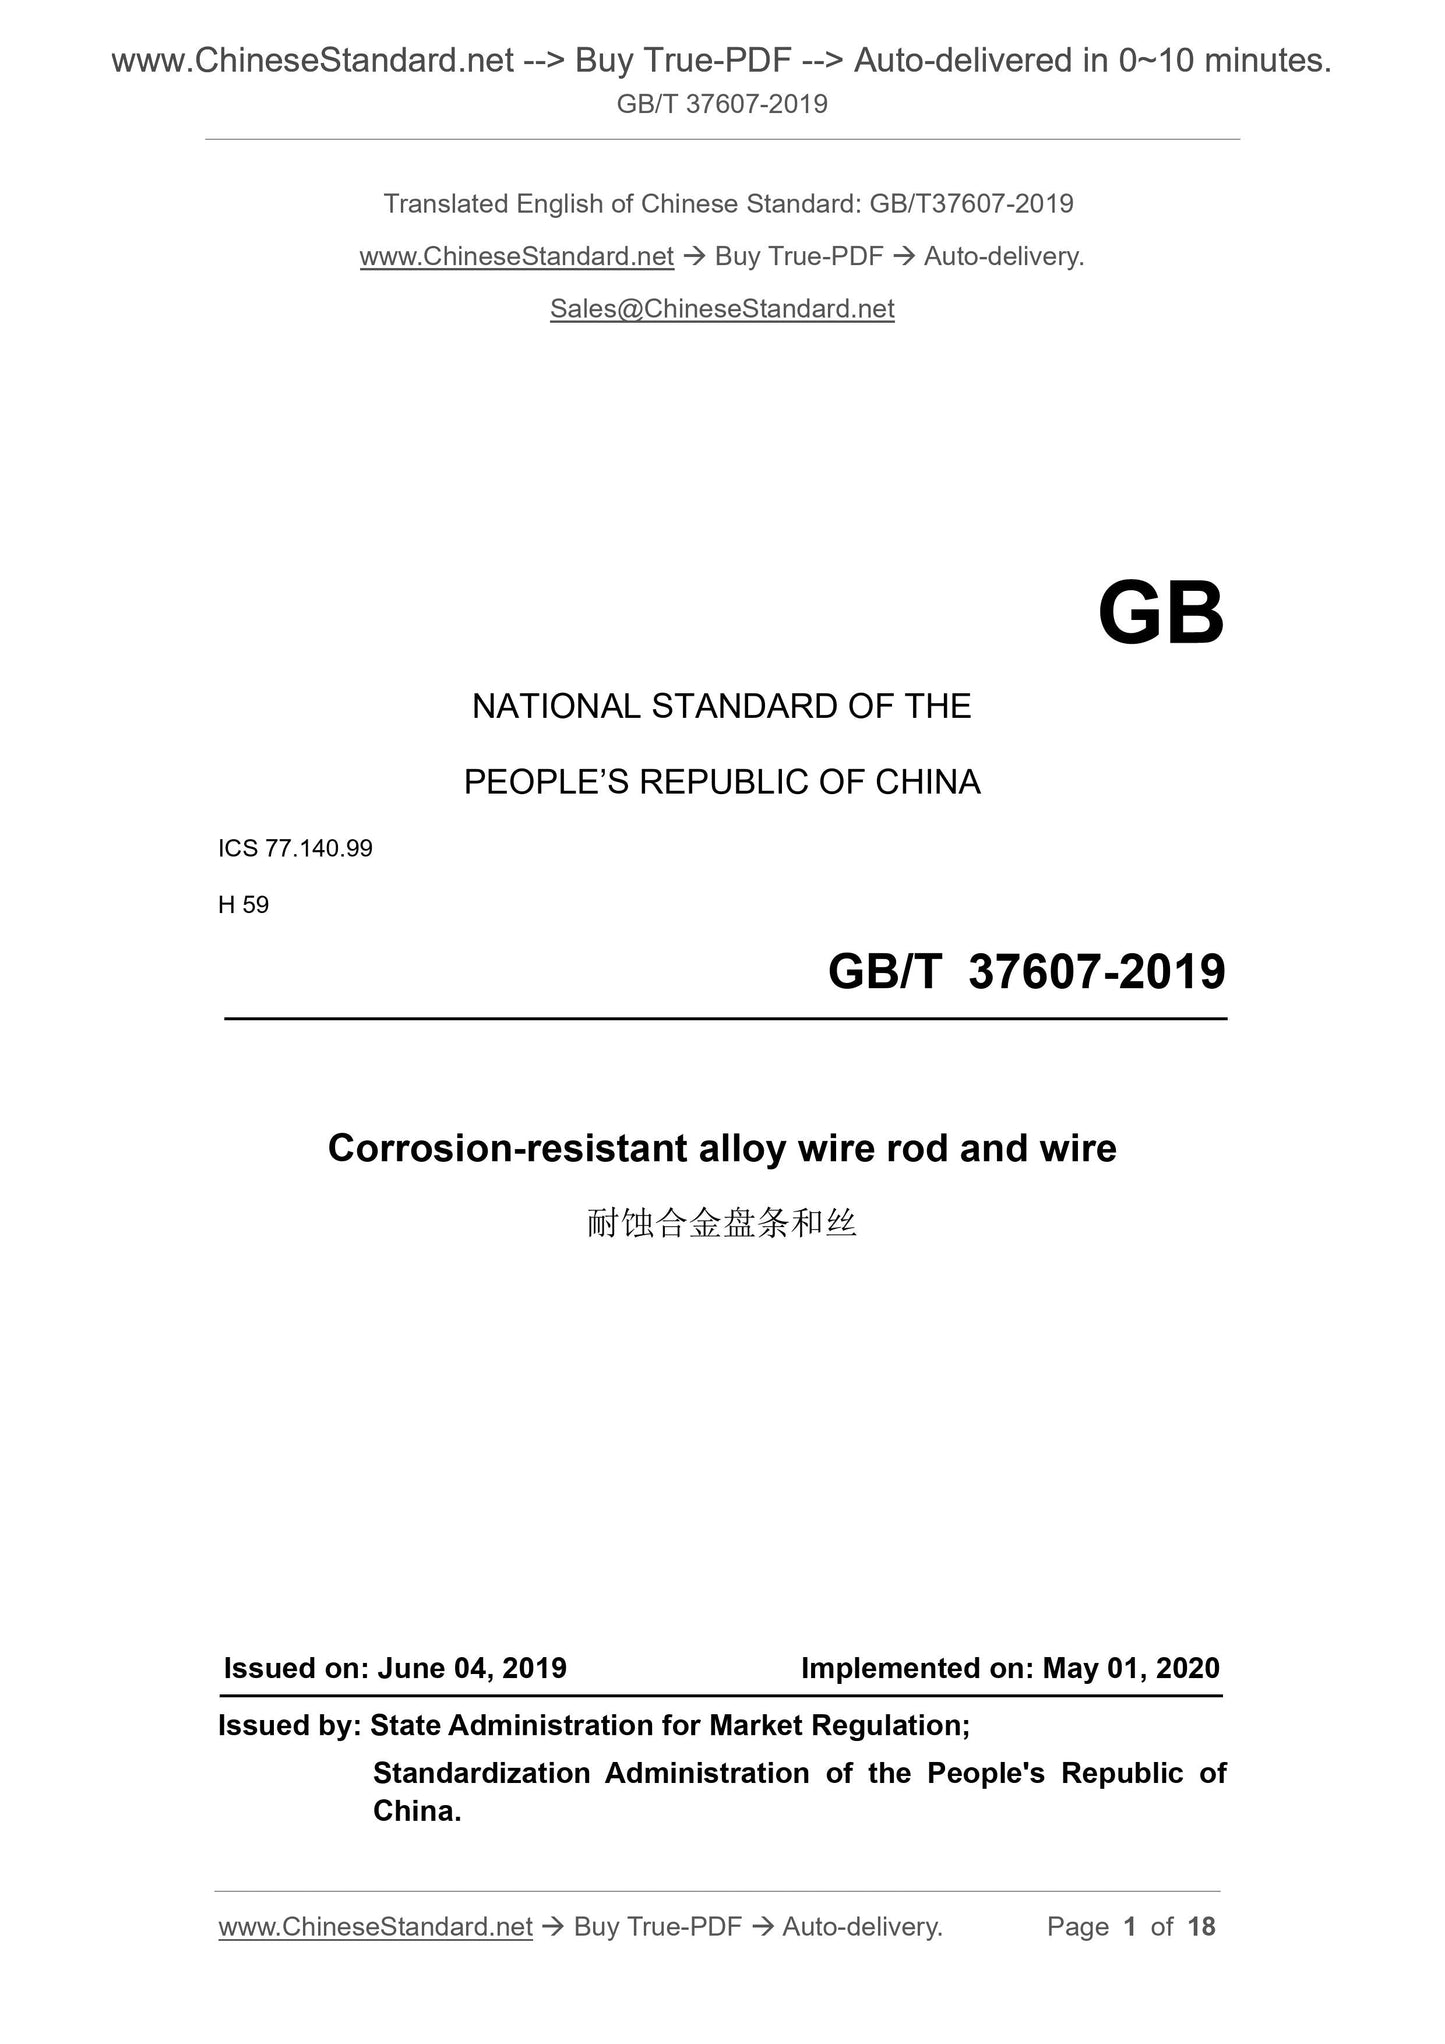 GB/T 37607-2019 Page 1